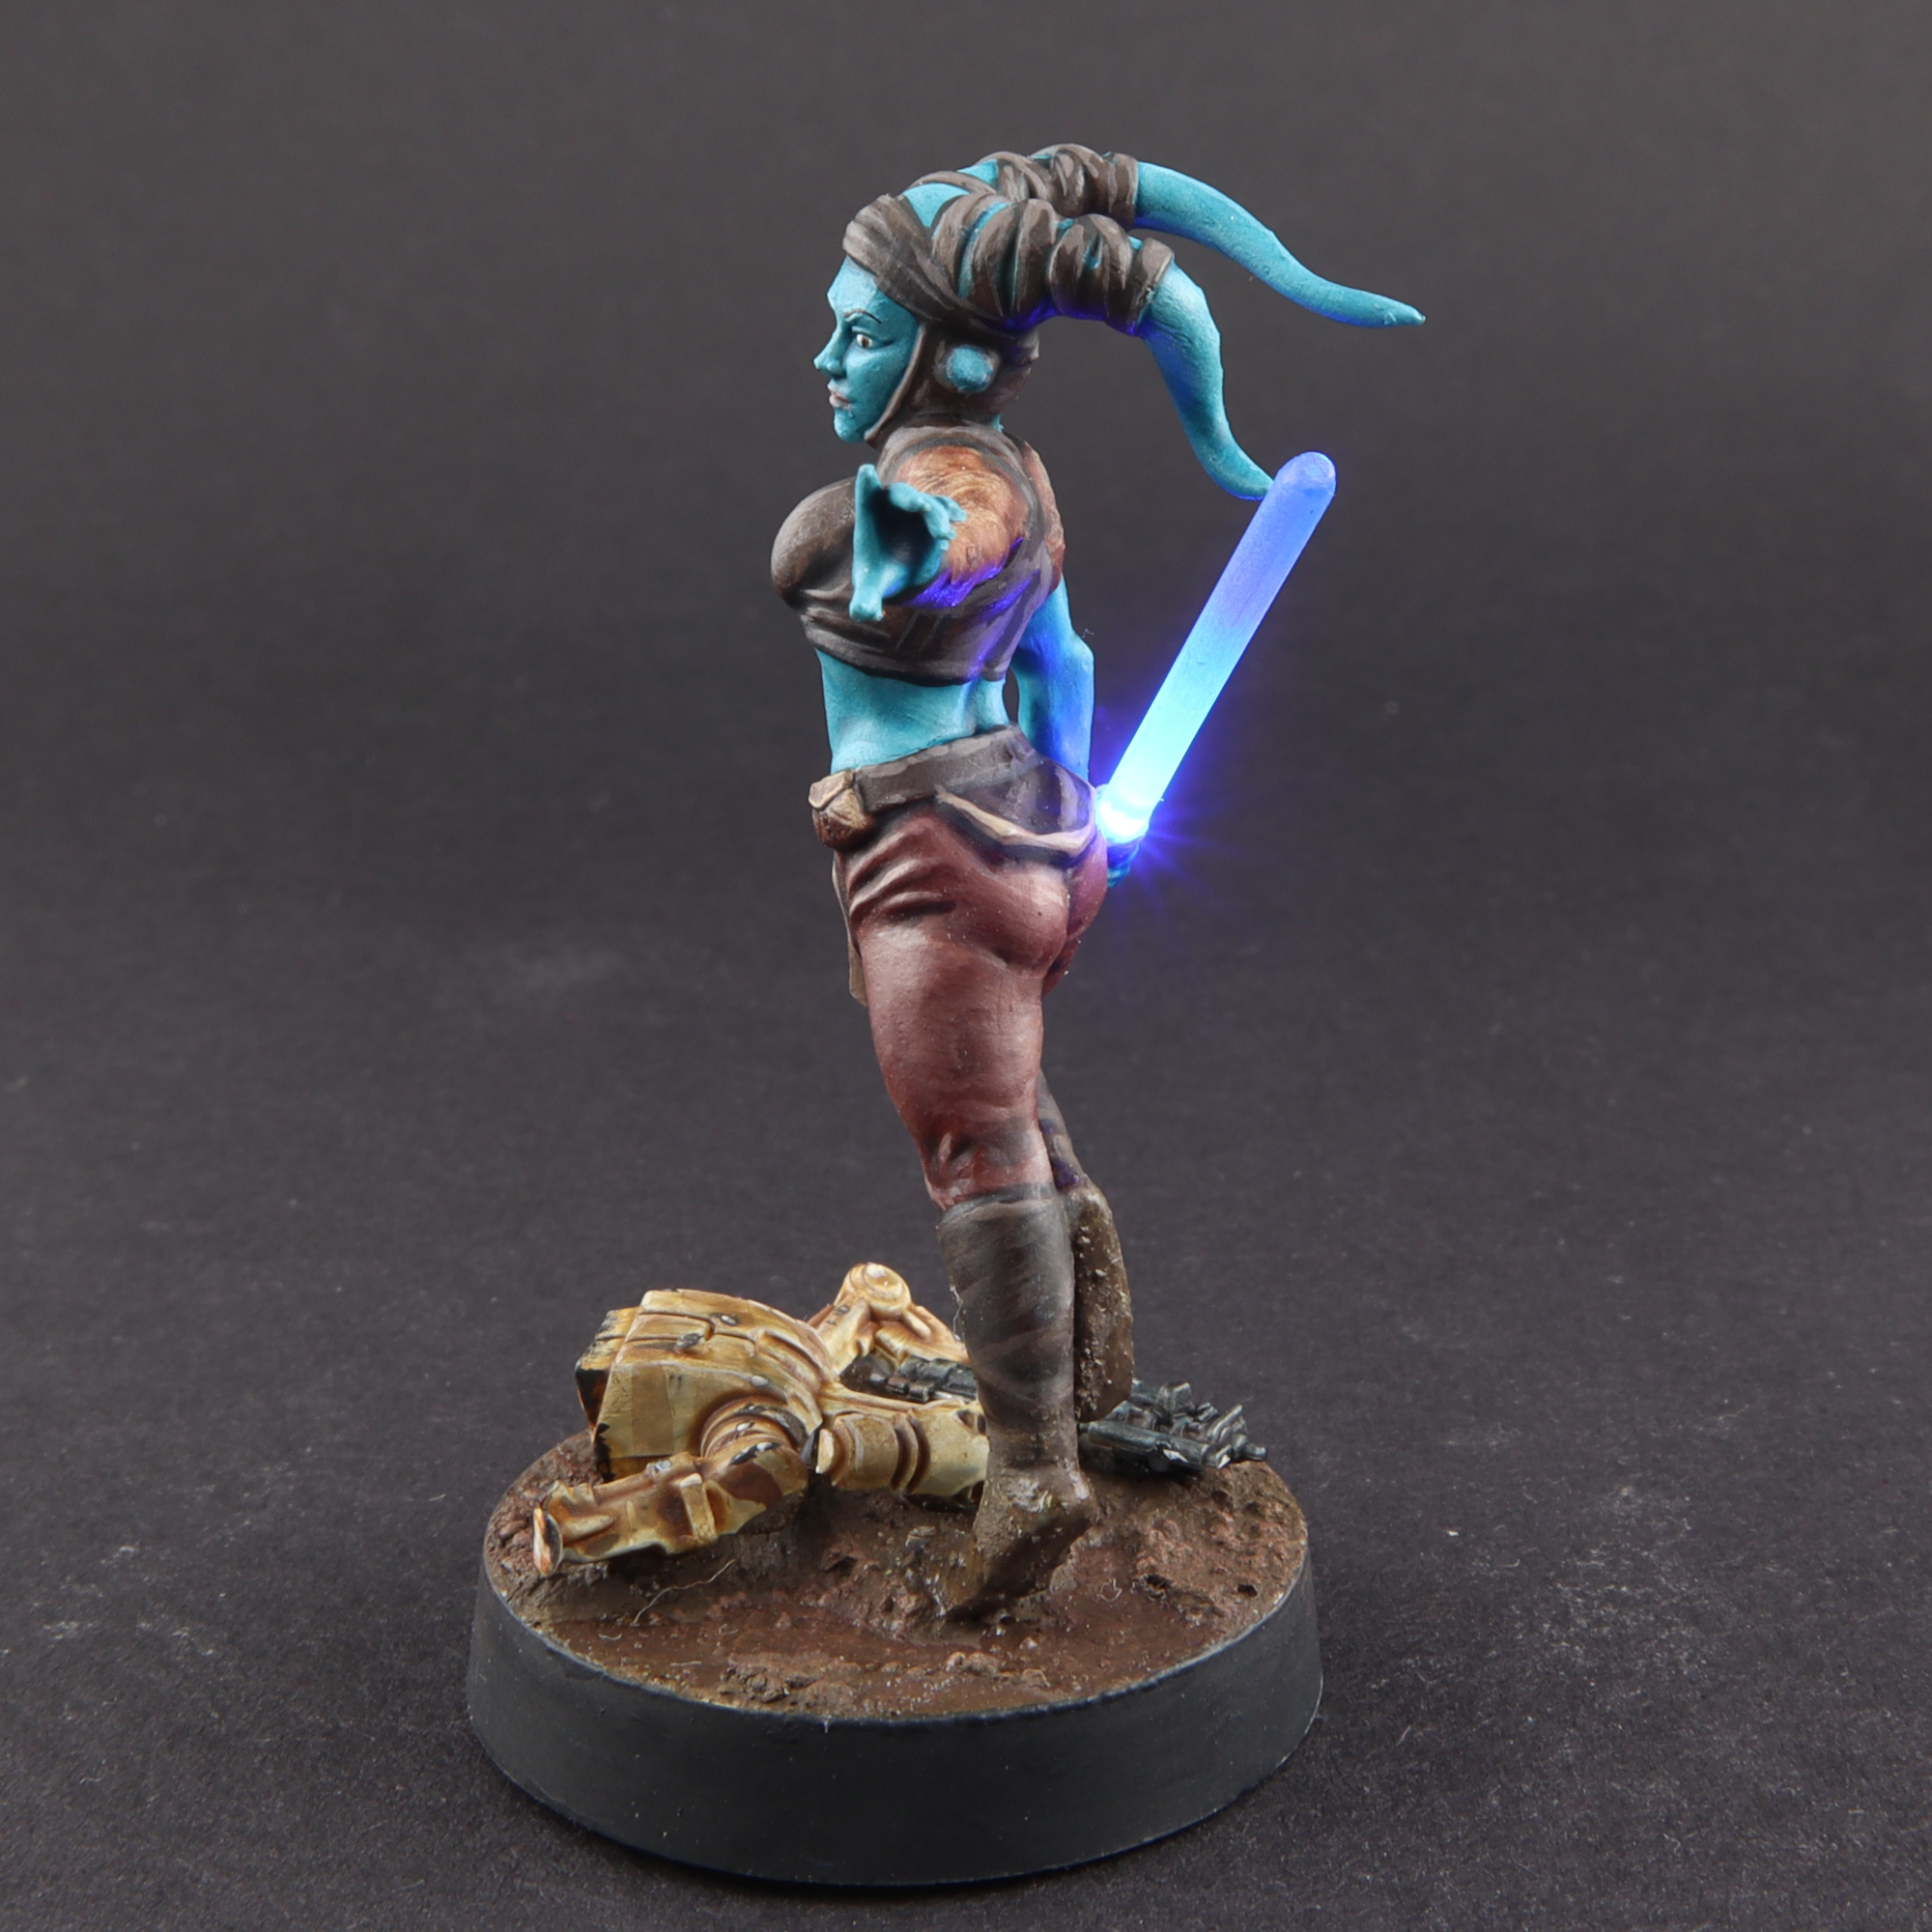 Star Wars Legion - Painted Aayla Secura miniature (3D printed, sculpted by Skull Forge Studios)